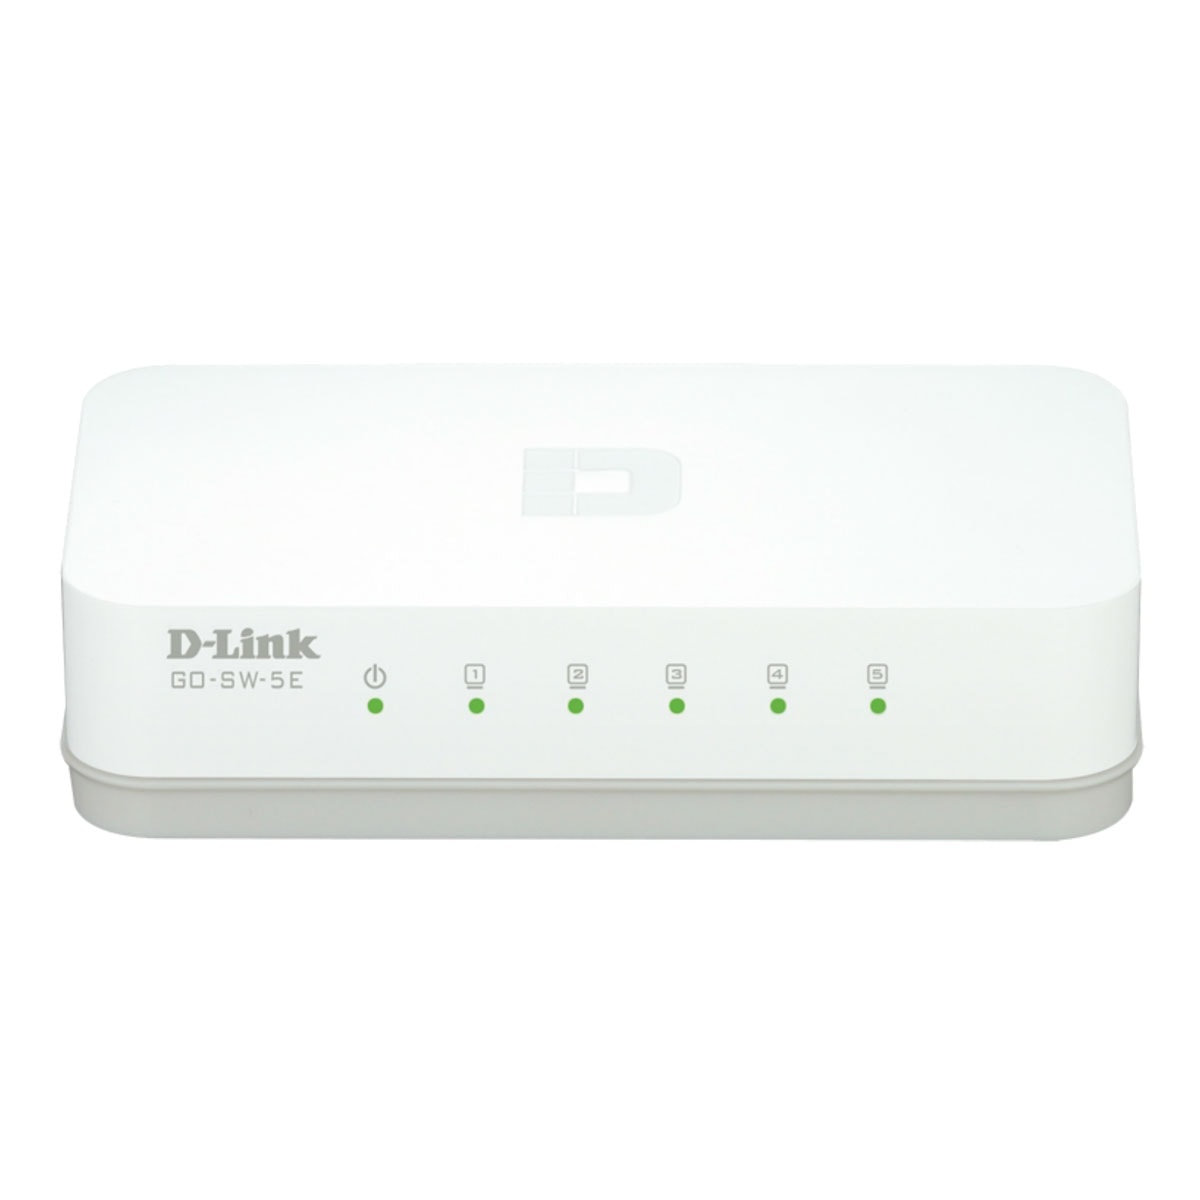 Switch D-Link 5 ports 10/100 - GO-SW-5E - grosbill-pro.com - 0